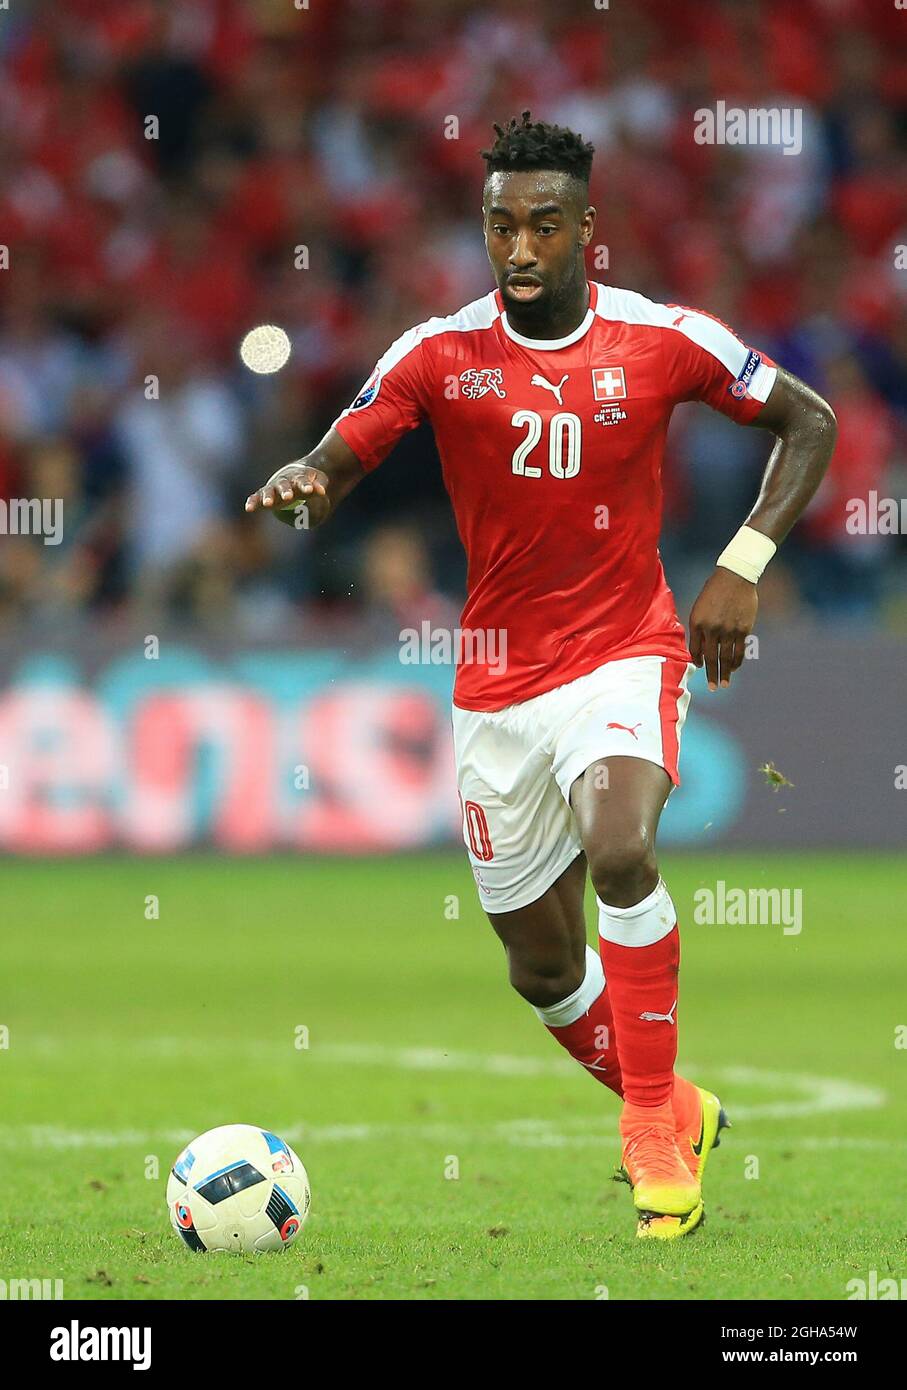 Johan Djourou of Switzerland during the UEFA European Championship 2016 match at the Stade Pierre Mauroy, Lille. Picture date June 19th, 2016 Pic David Klein/Sportimage via PA Images Stock Photo